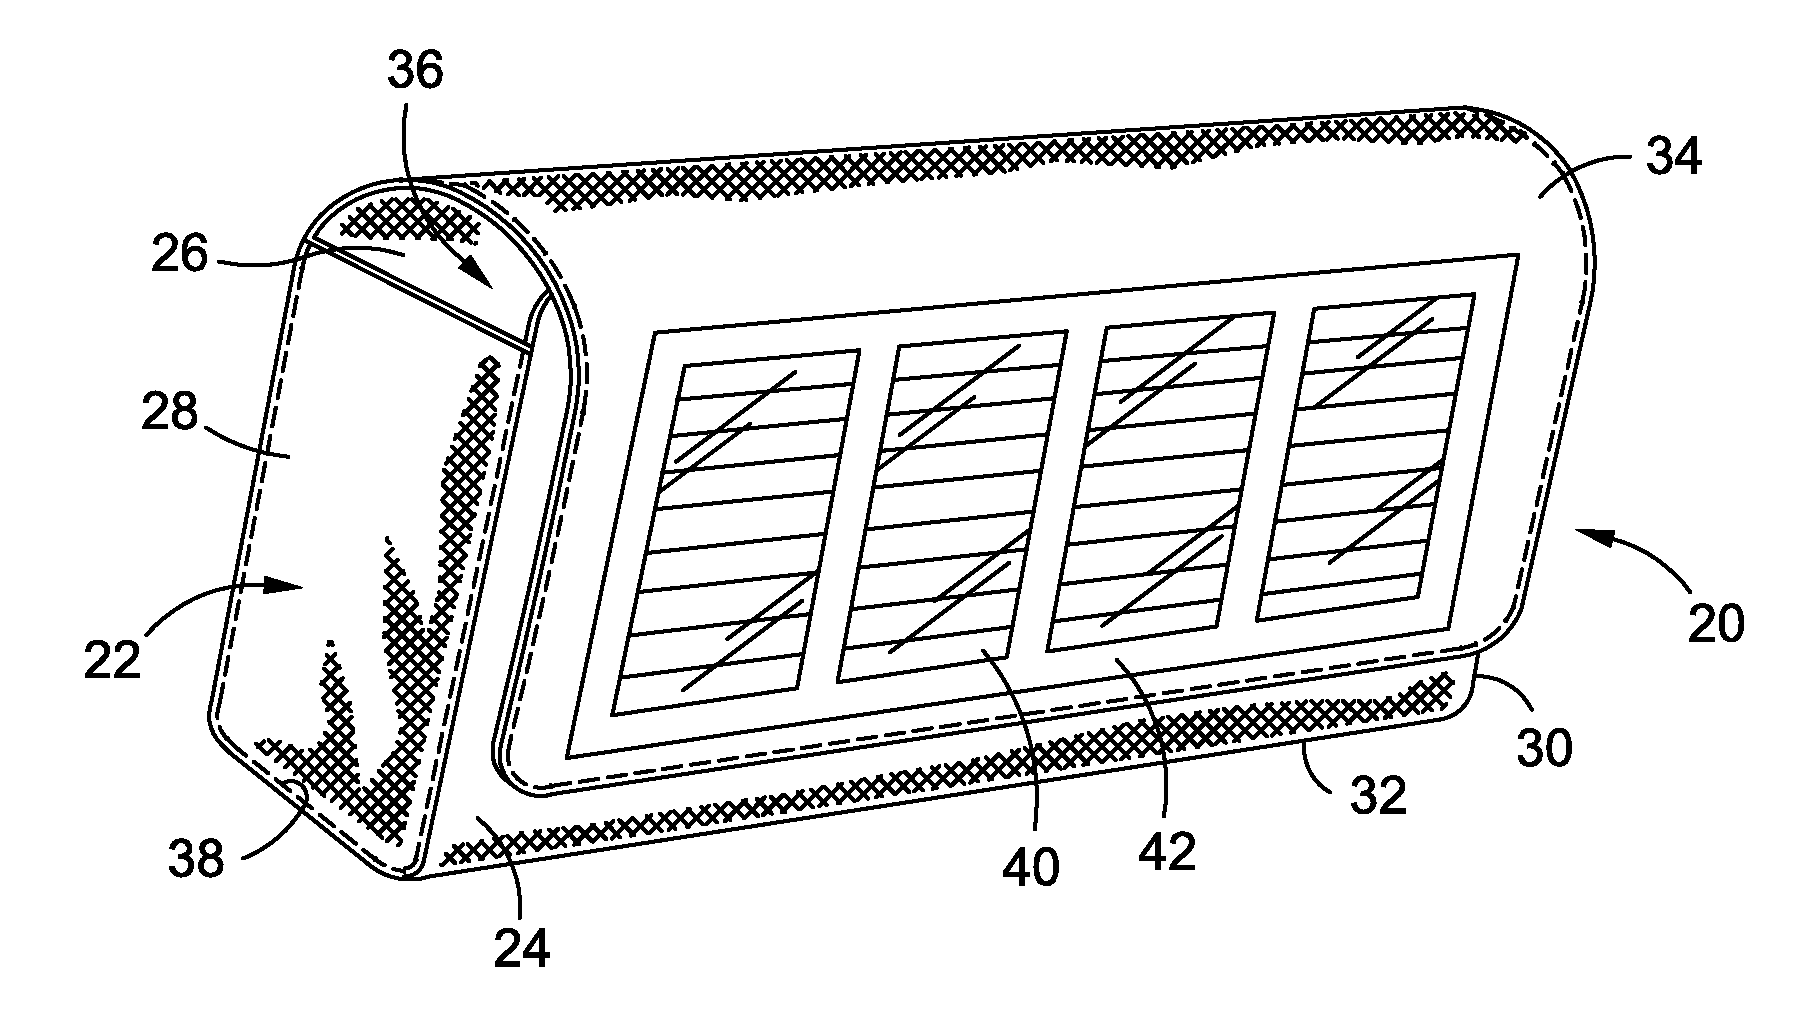 Portable electronic device carrier with charging system